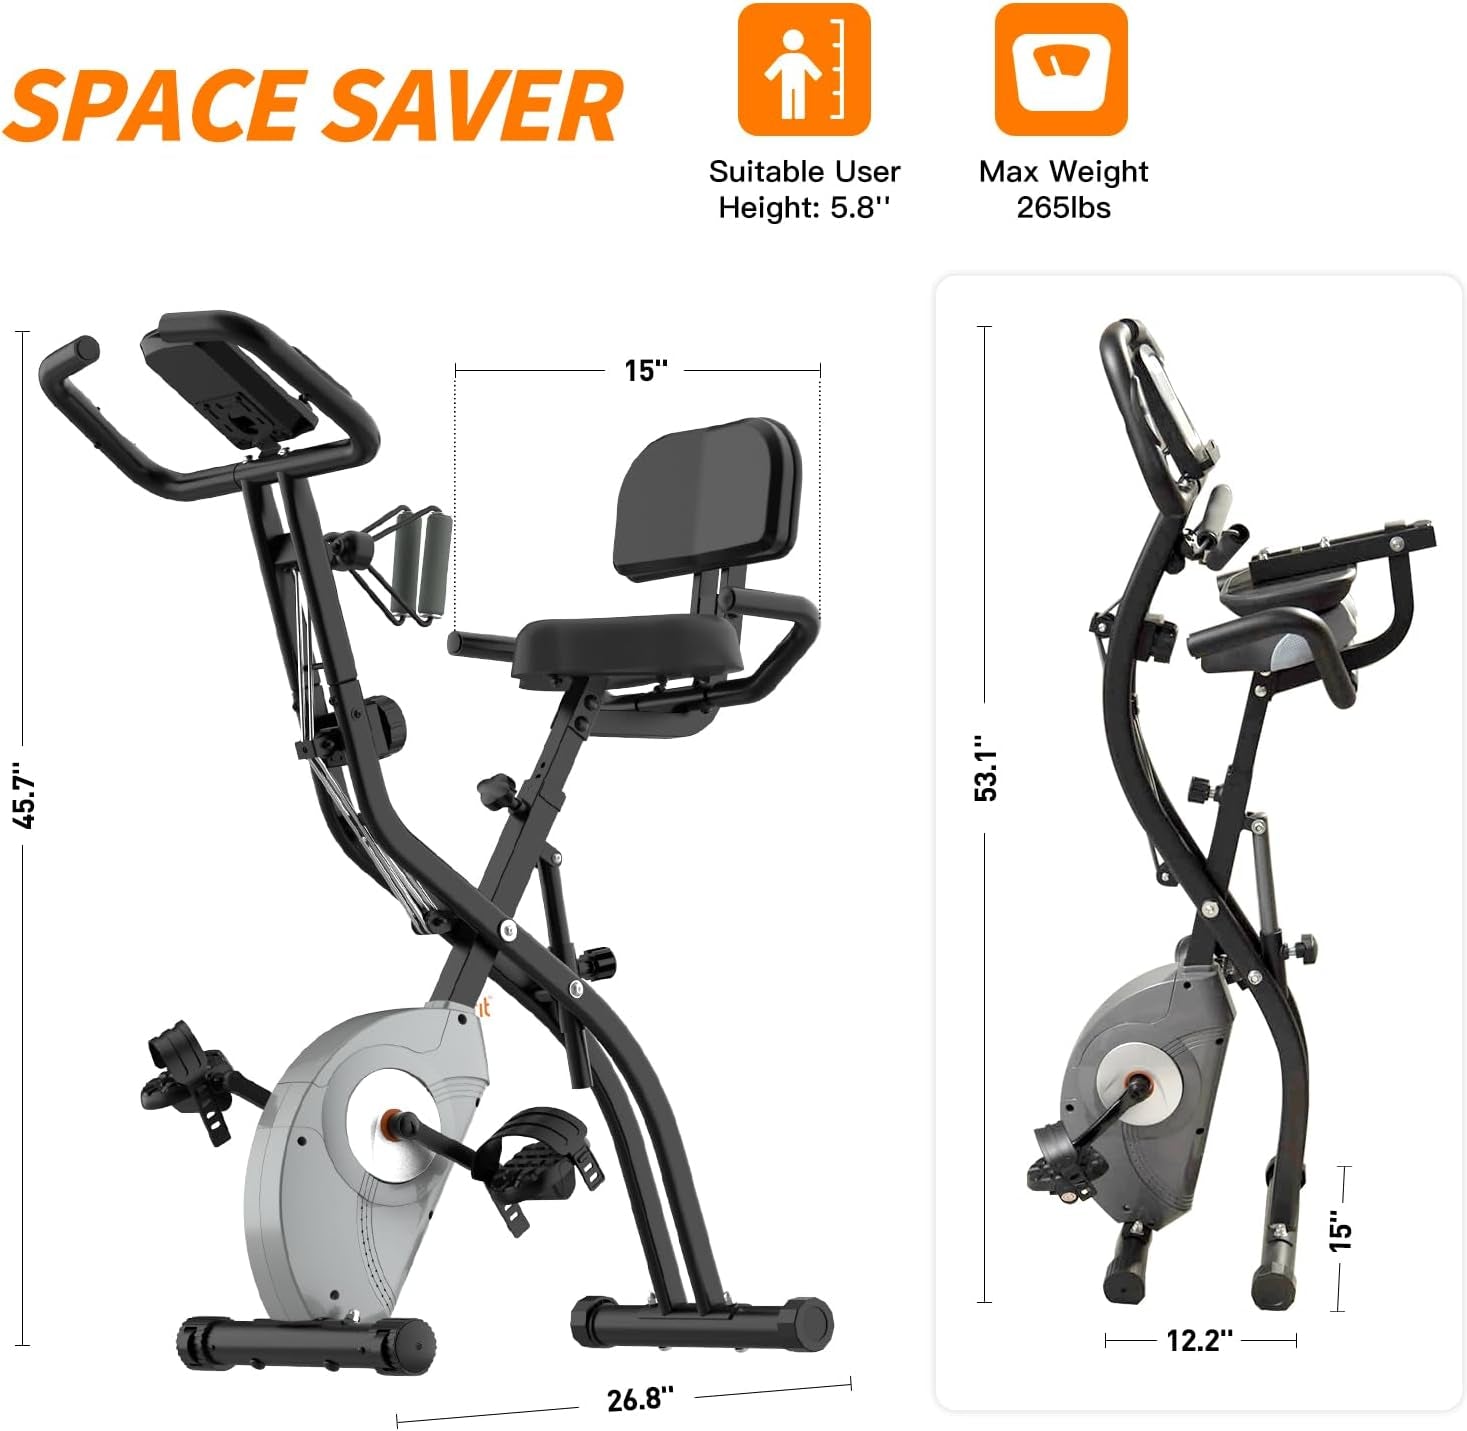 Folding Exercise Bike, Magnetic Foldable Stationary Bike, Indoor Cycling Exercise Bike for Home Workout